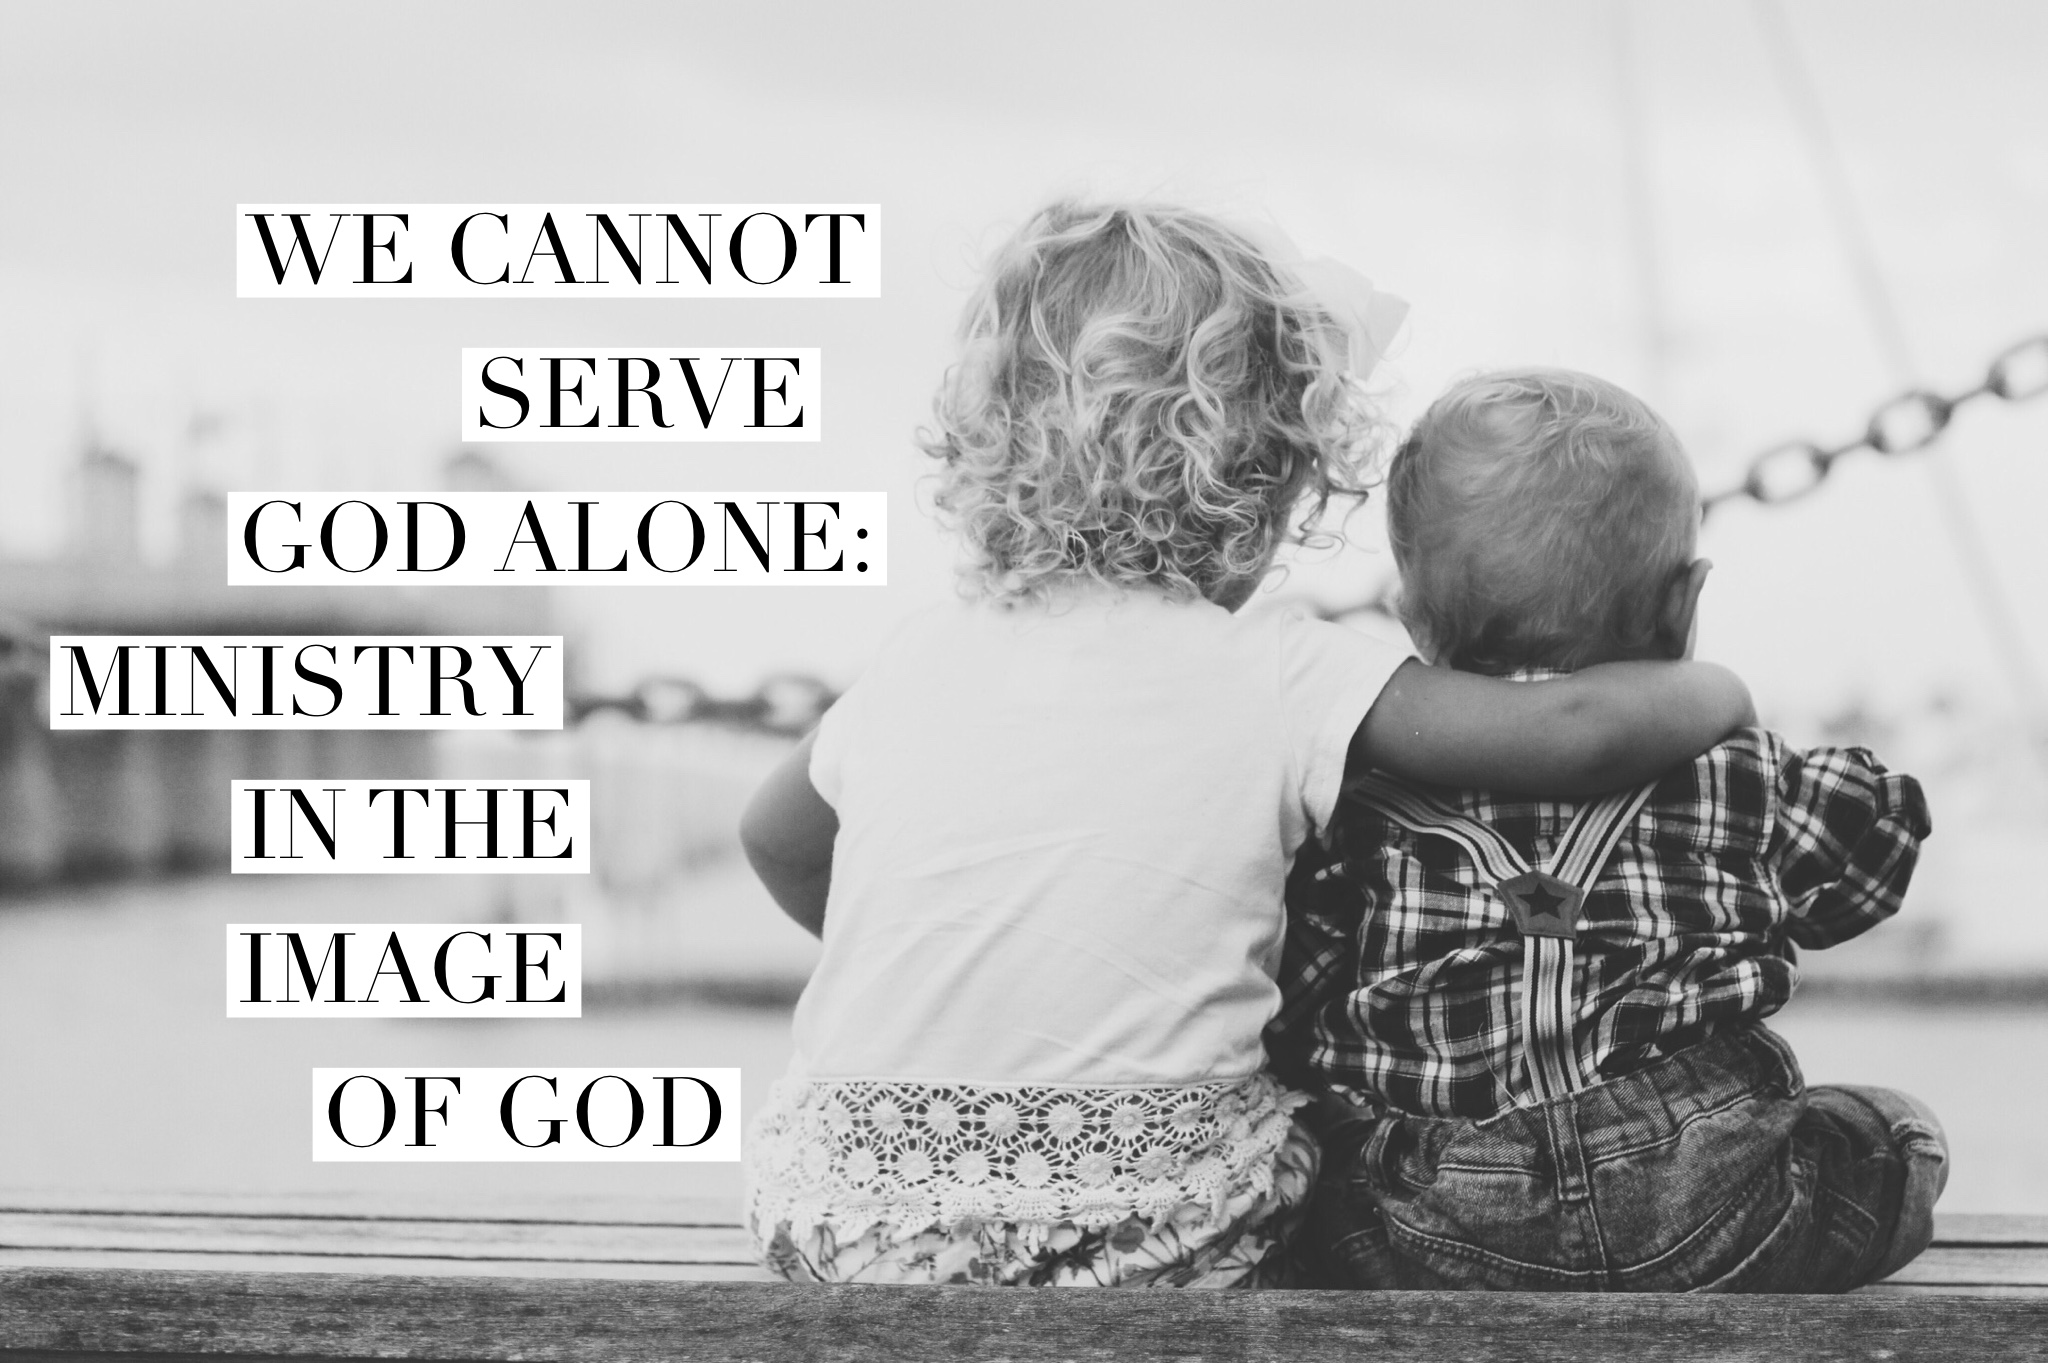 We Cannot Serve God Alone: Ministry in the Image of God